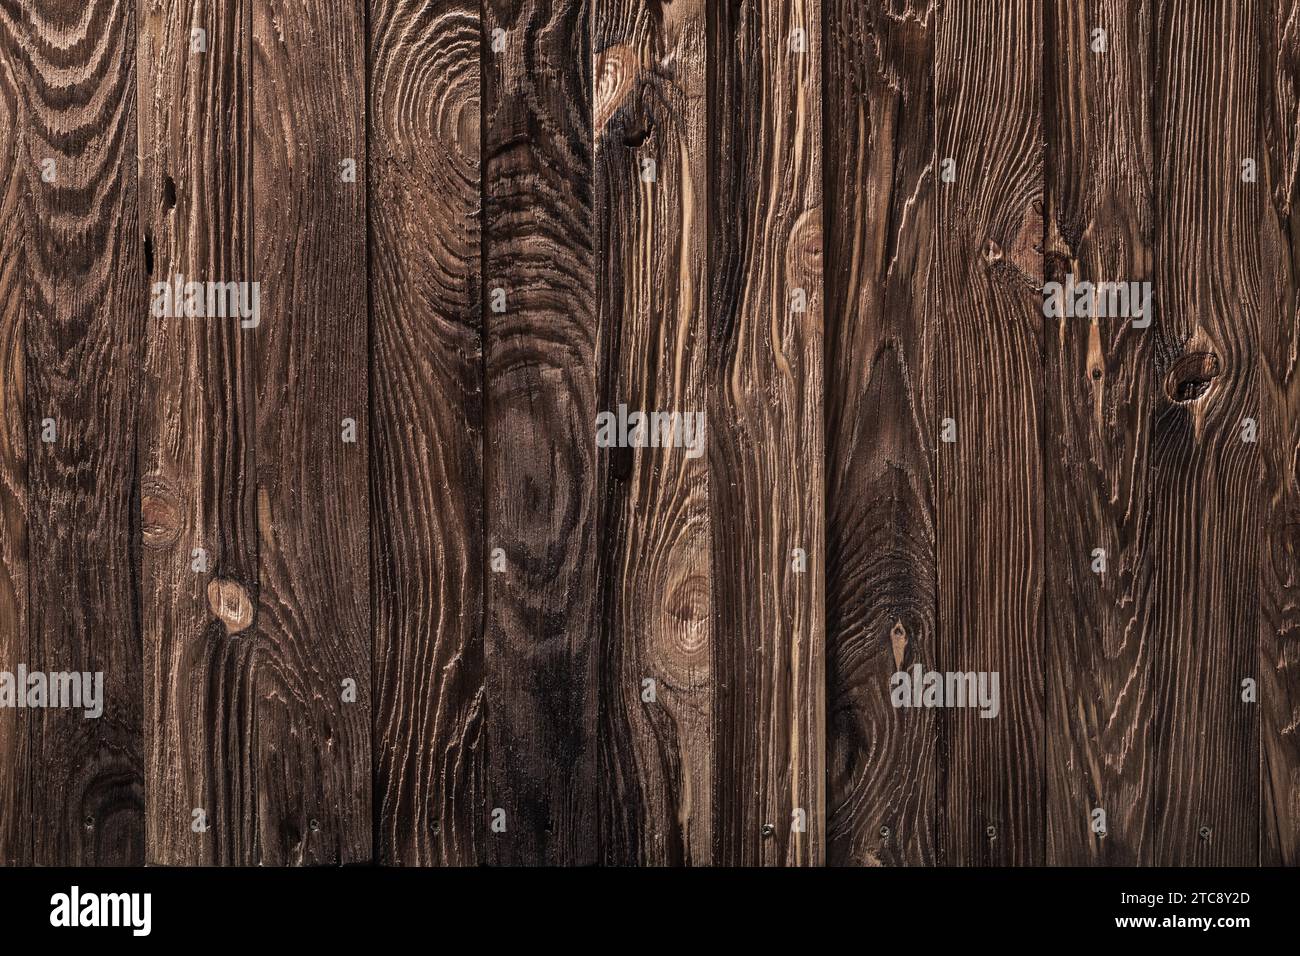 General view on background of narrow wooden boards Vintage wooden surface Stock Photo